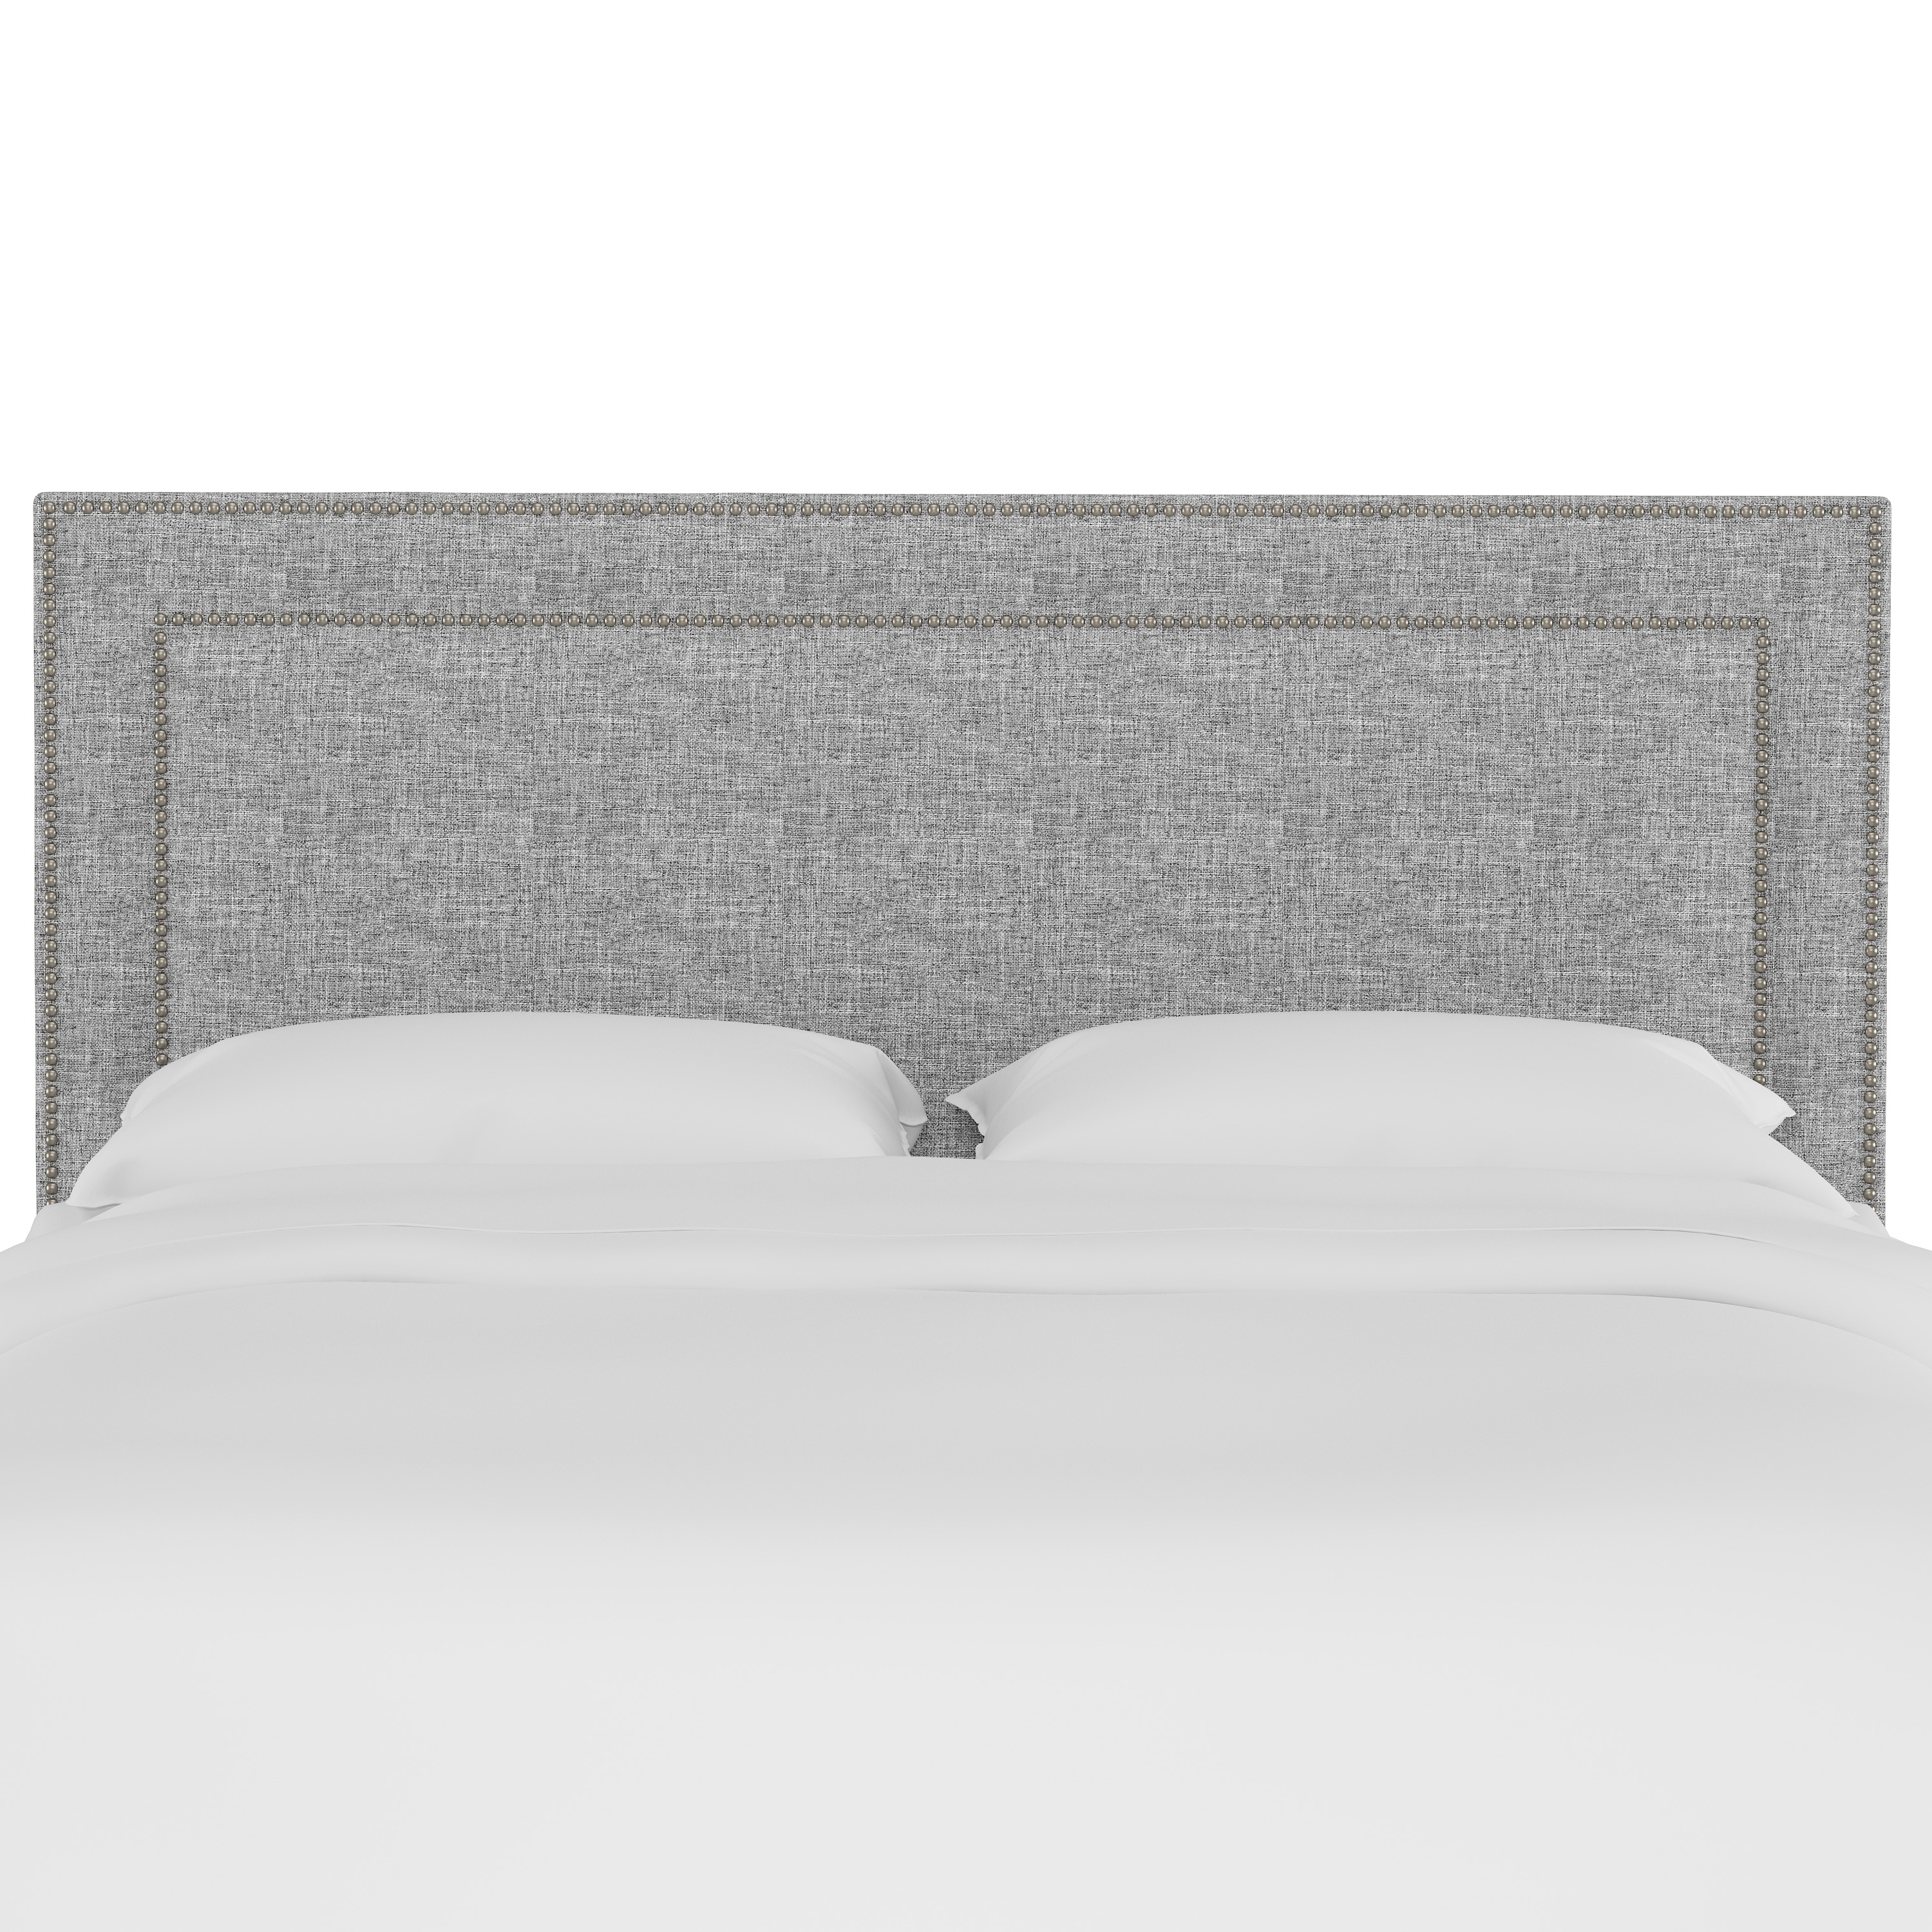 Williams Headboard, Queen, Pumice, Pewter Nailheads - Image 1